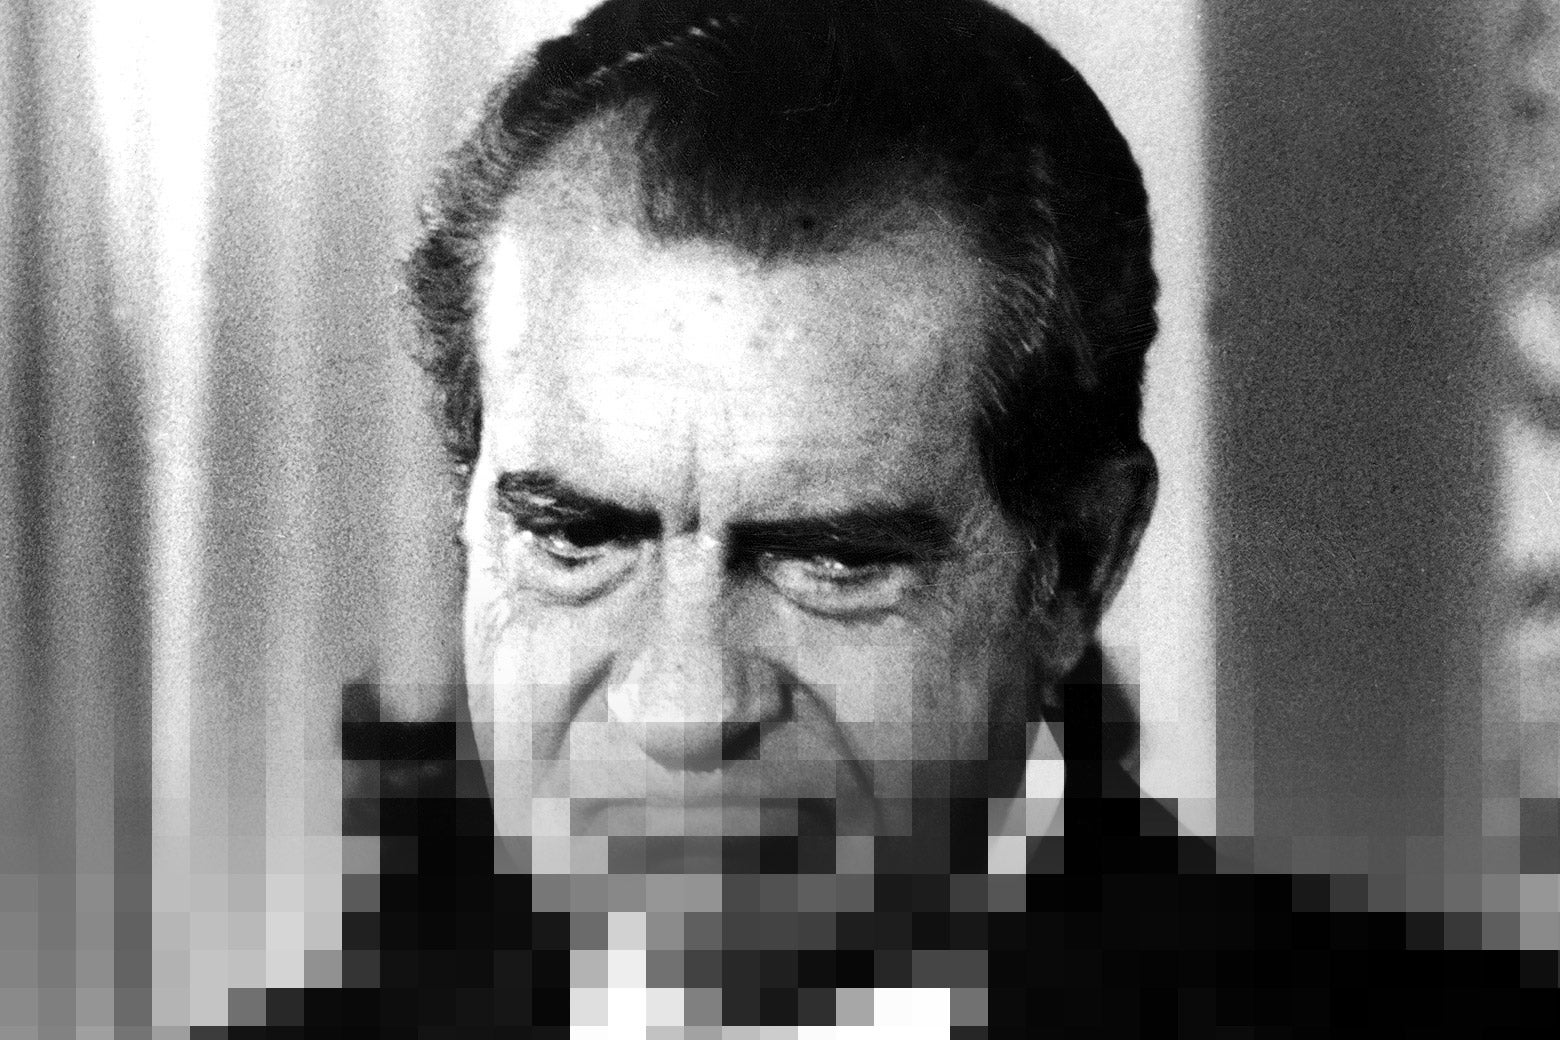 A photo of Richard Nixon pixelated as if it was downloading in the 1970s.